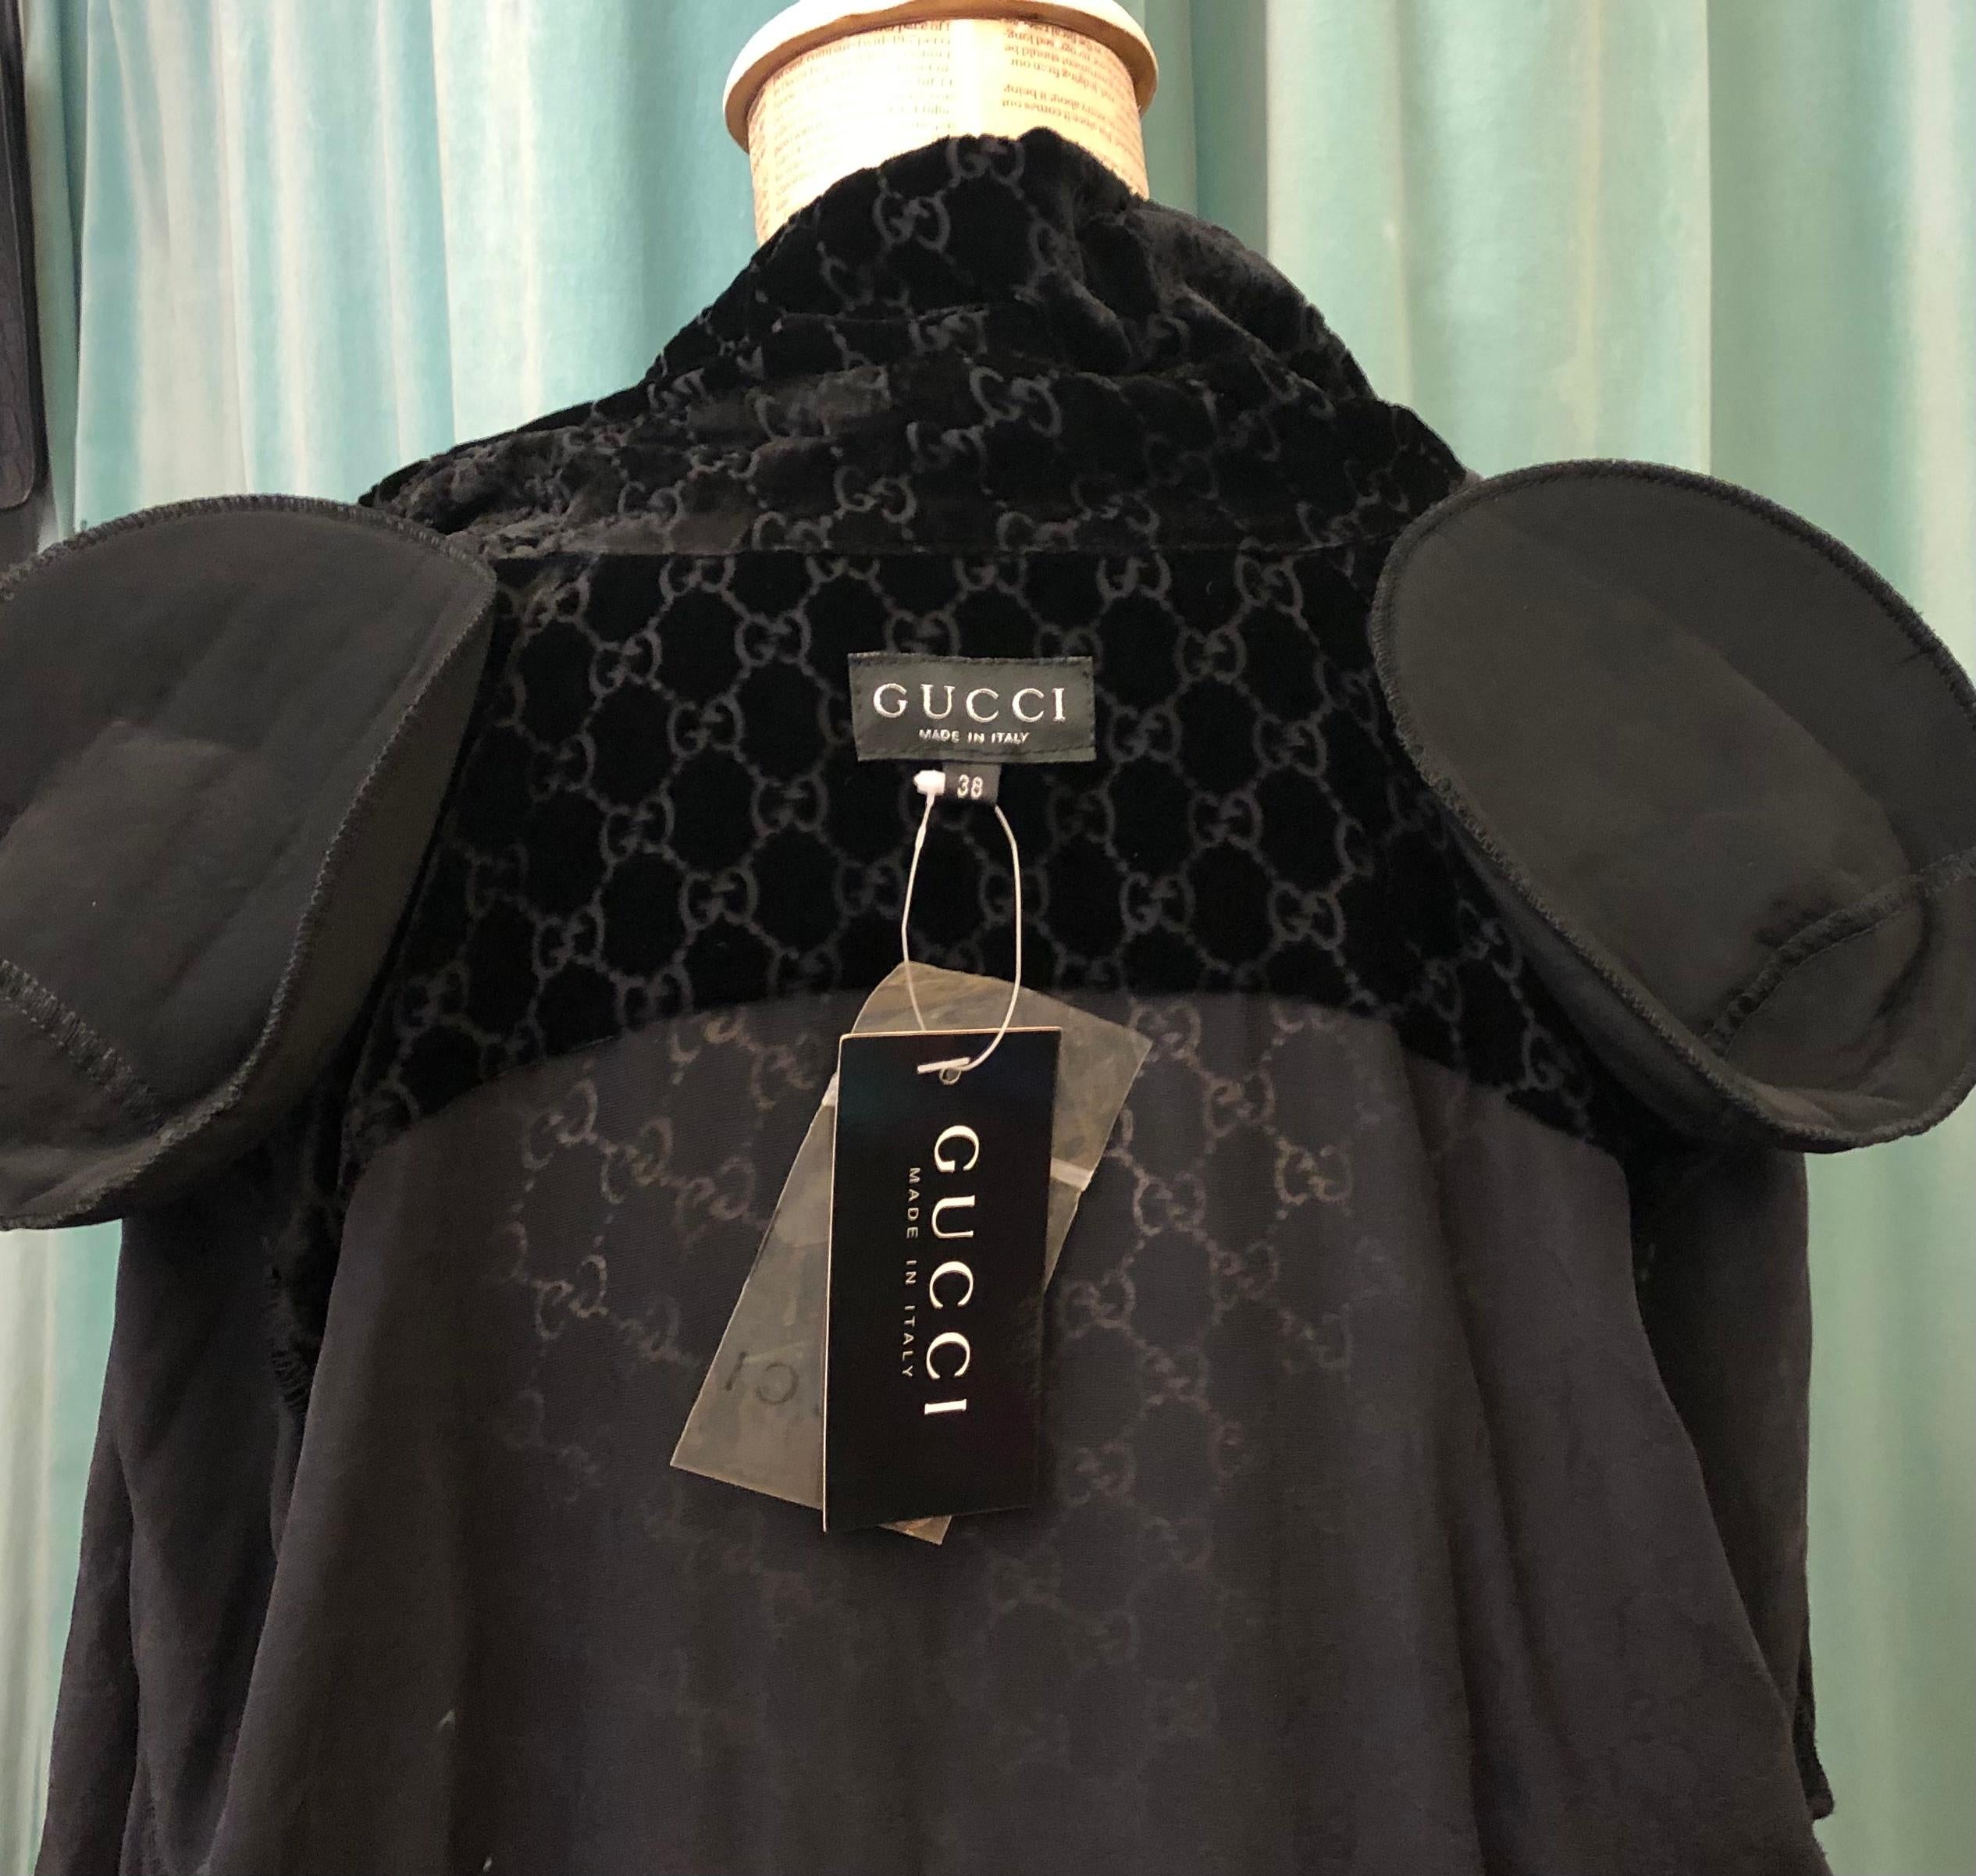 Unworn with original tag 1997 Gucci by Tom Ford velvet “GG” logo shirt  2